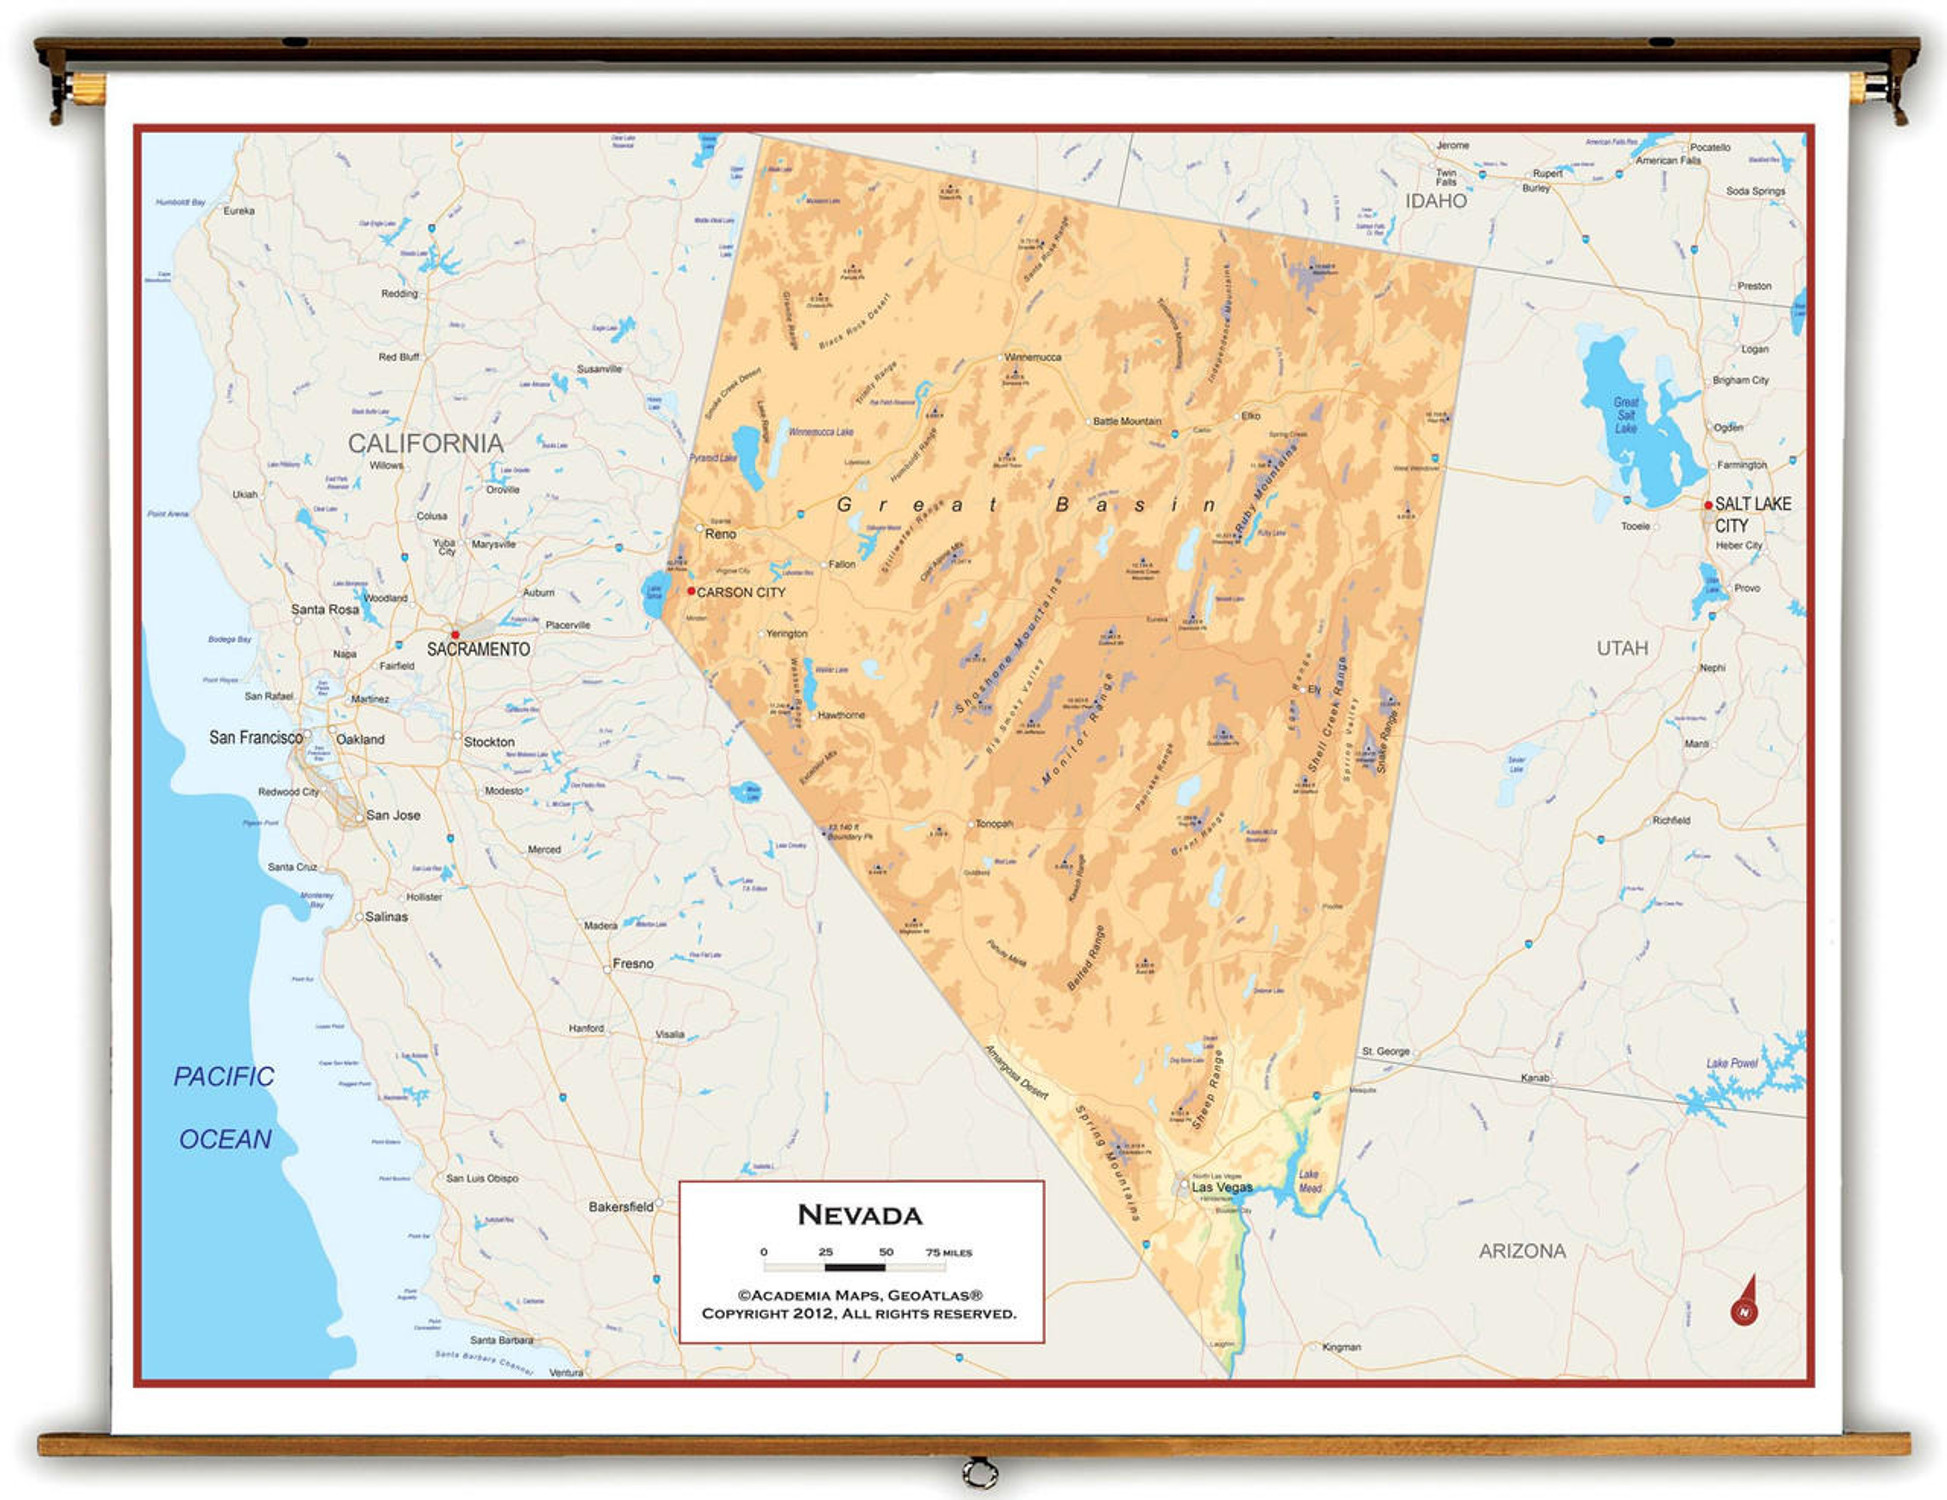 Nevada Physical Pull-Down Map, image 1, World Maps Online